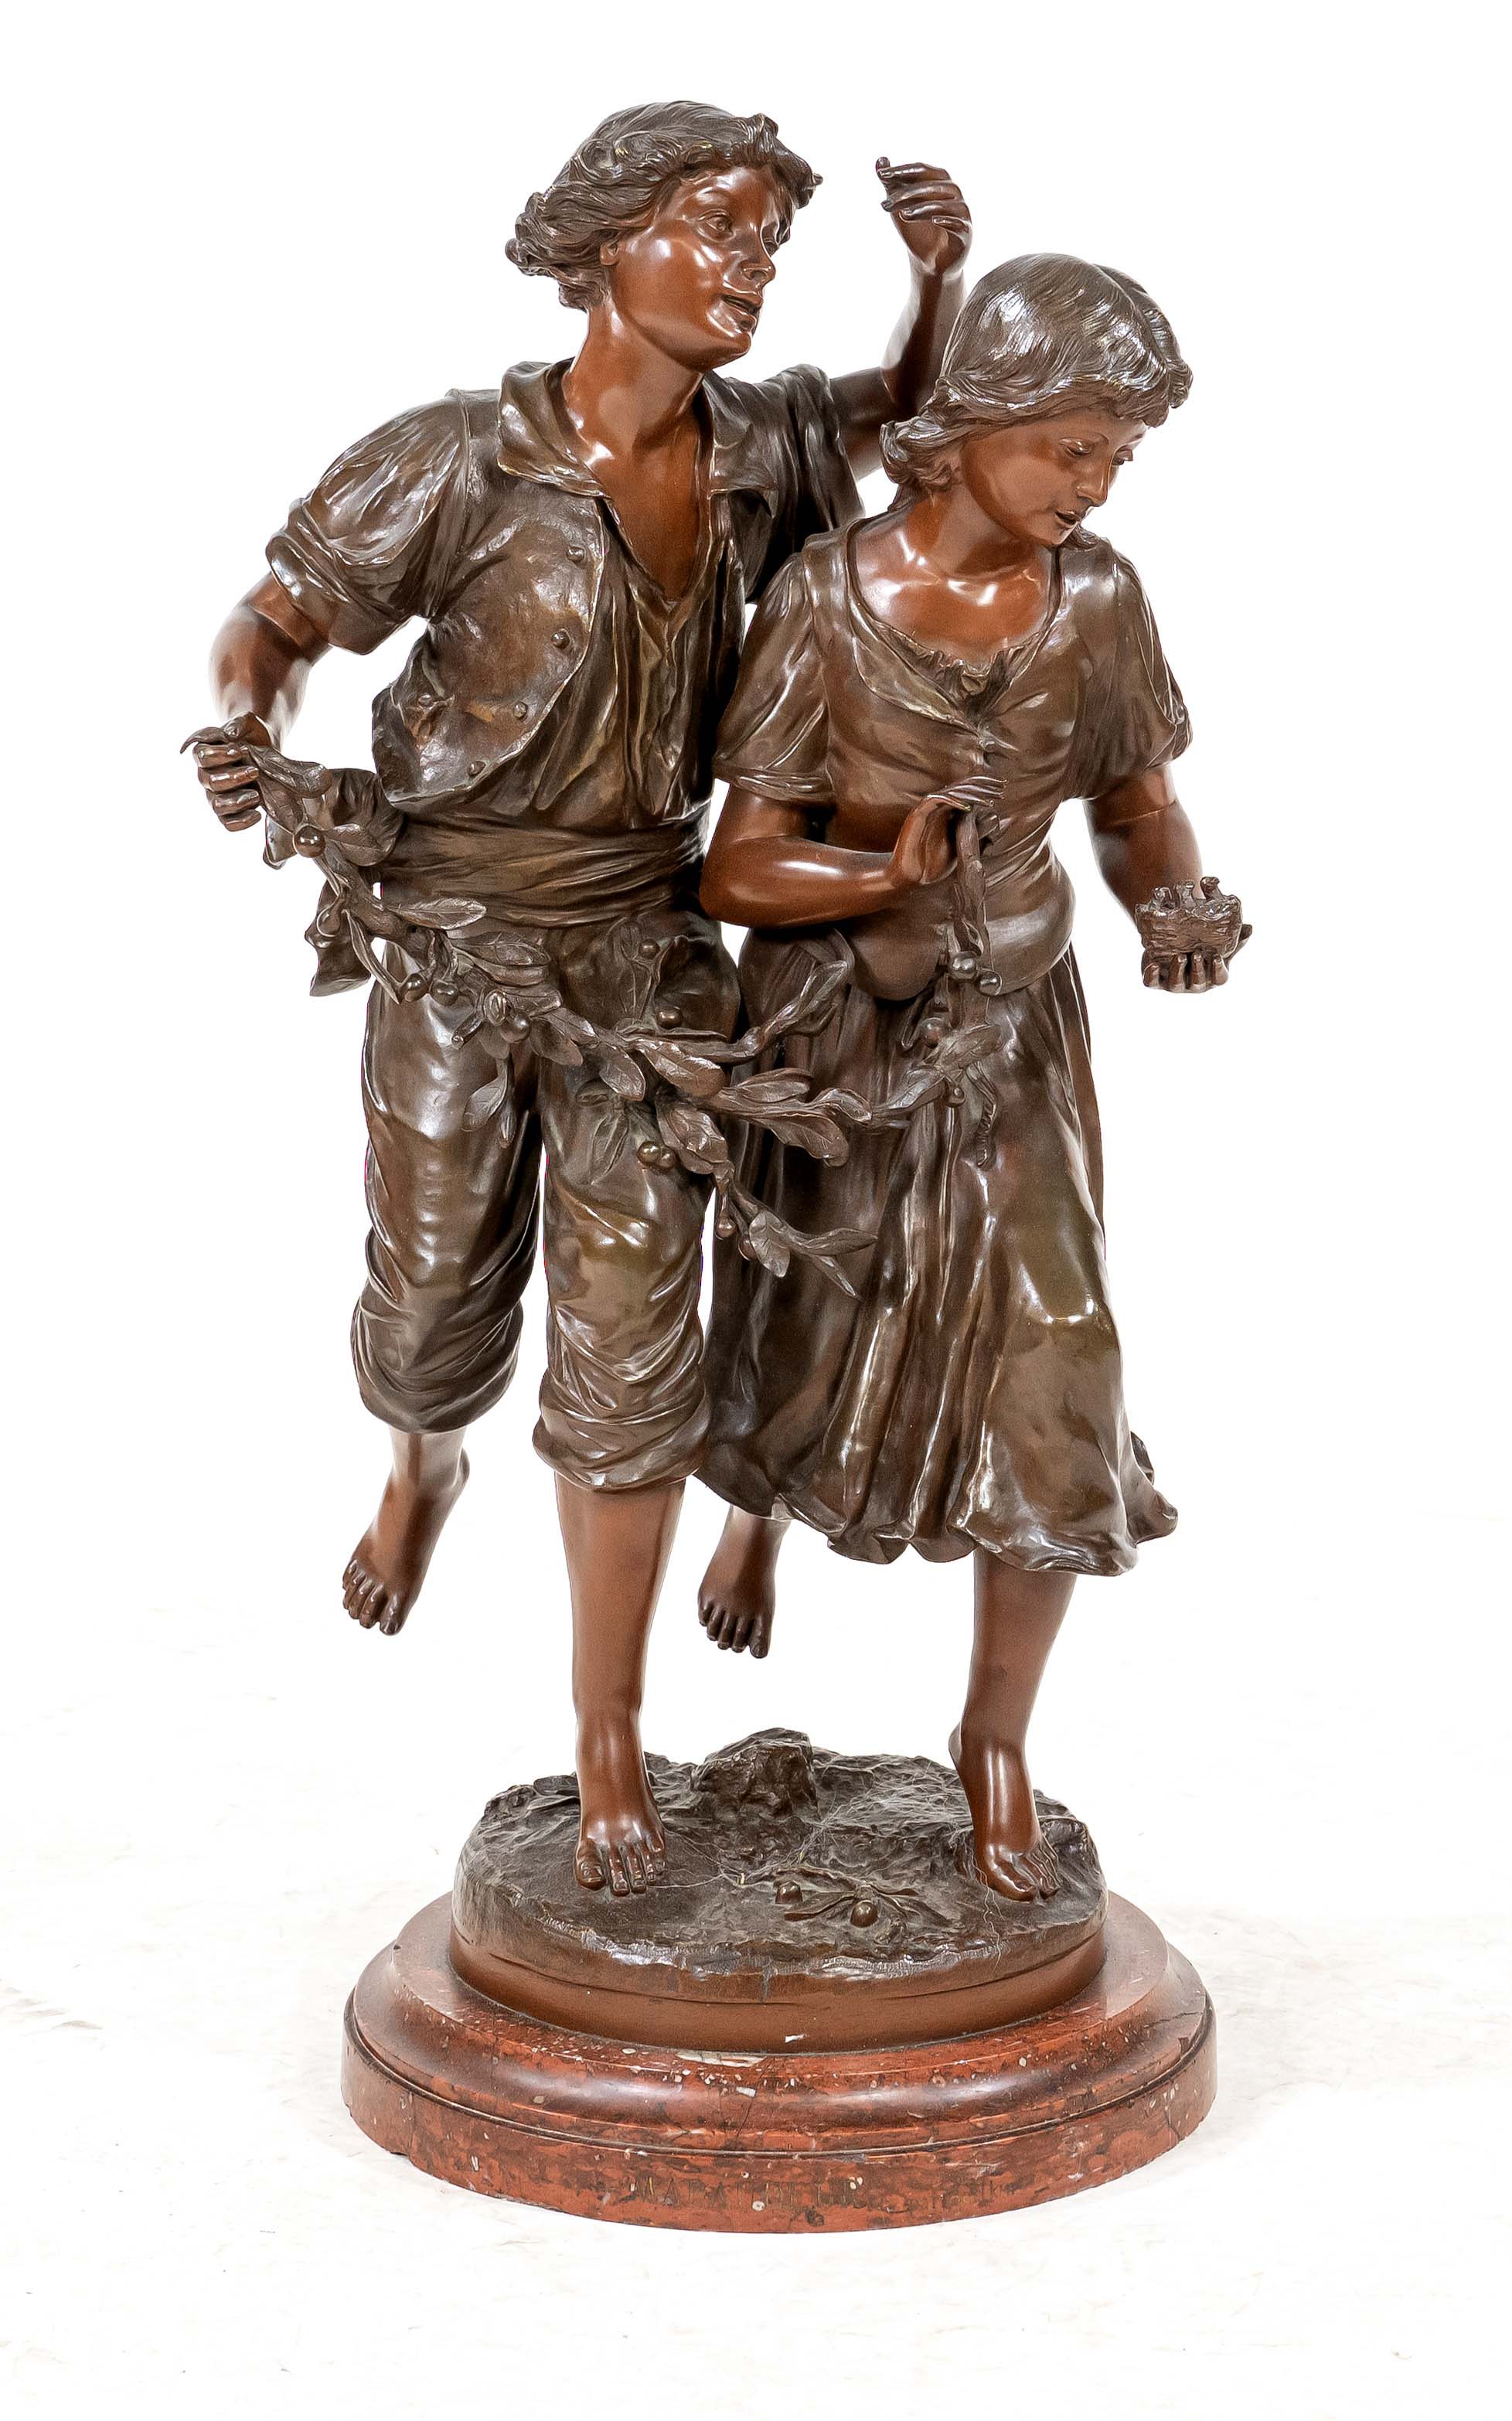 signed Berthin, french sculptor of the 19th century, large bronze group of a running young couple